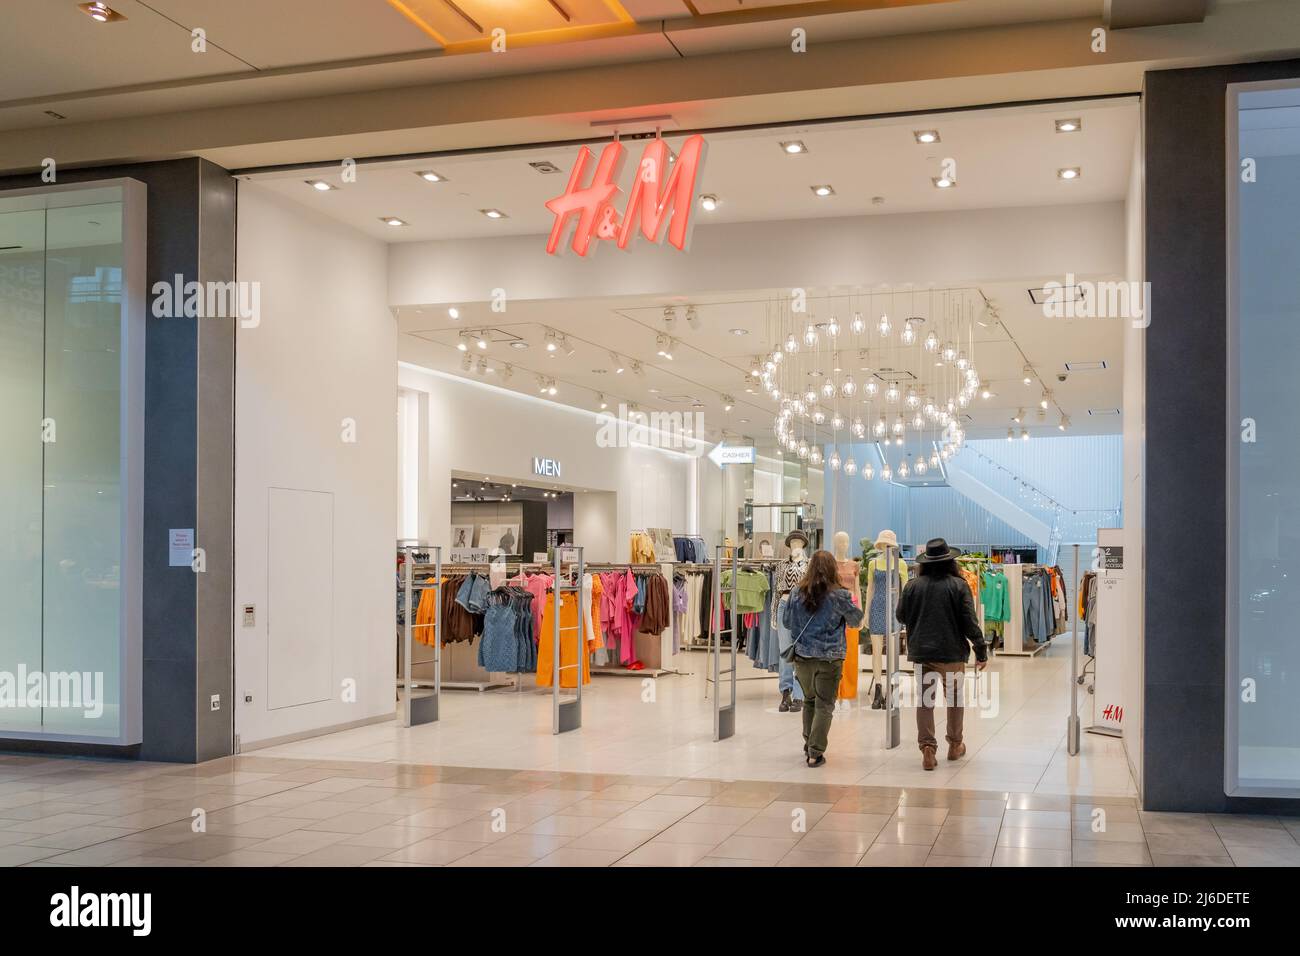 Hm Sign On The Wall Hm Hennes Mauritz Ab Is A Swedish Multinational  Clothingretail Company Clothing For Men Women Teenagers And Children Stock  Photo - Download Image Now - iStock